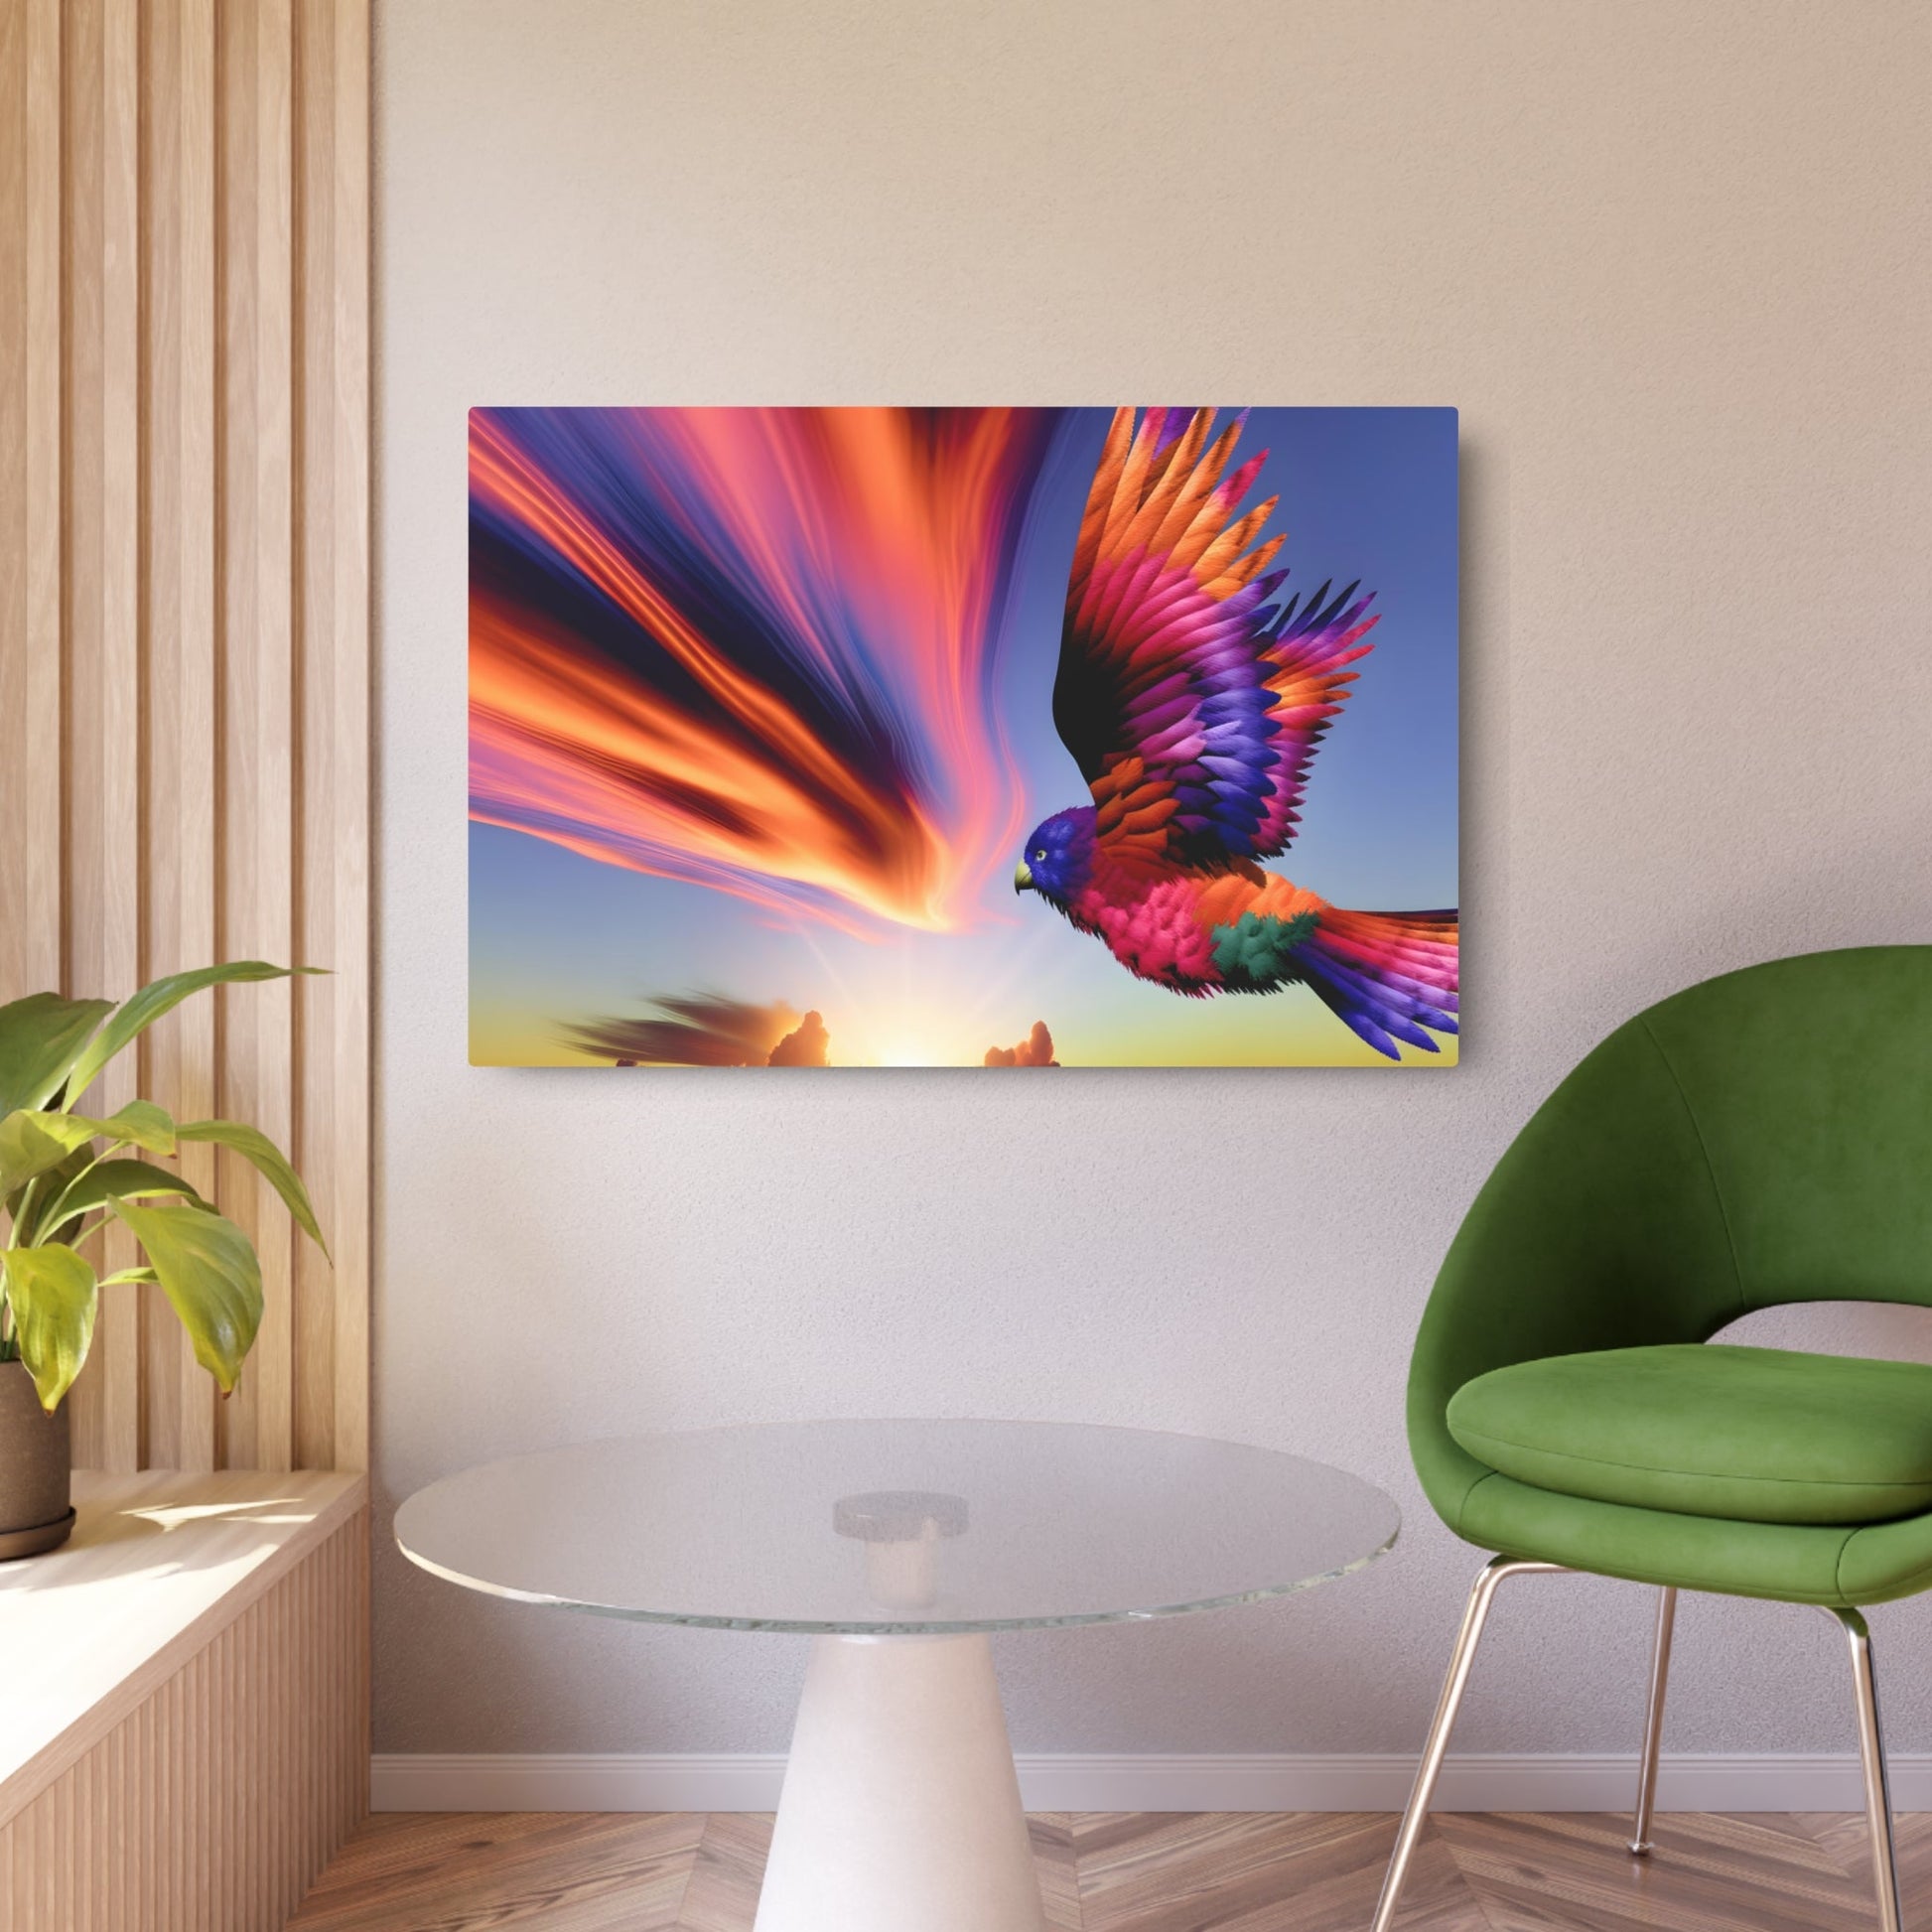 Metal Poster Art | "Vibrant and Graceful Bird Soaring at Sunset - Modern Digital Art in Contemporary Style with Realistic and Fantasy Elements" - Metal Poster Art 36″ x 24″ (Horizontal) 0.12''